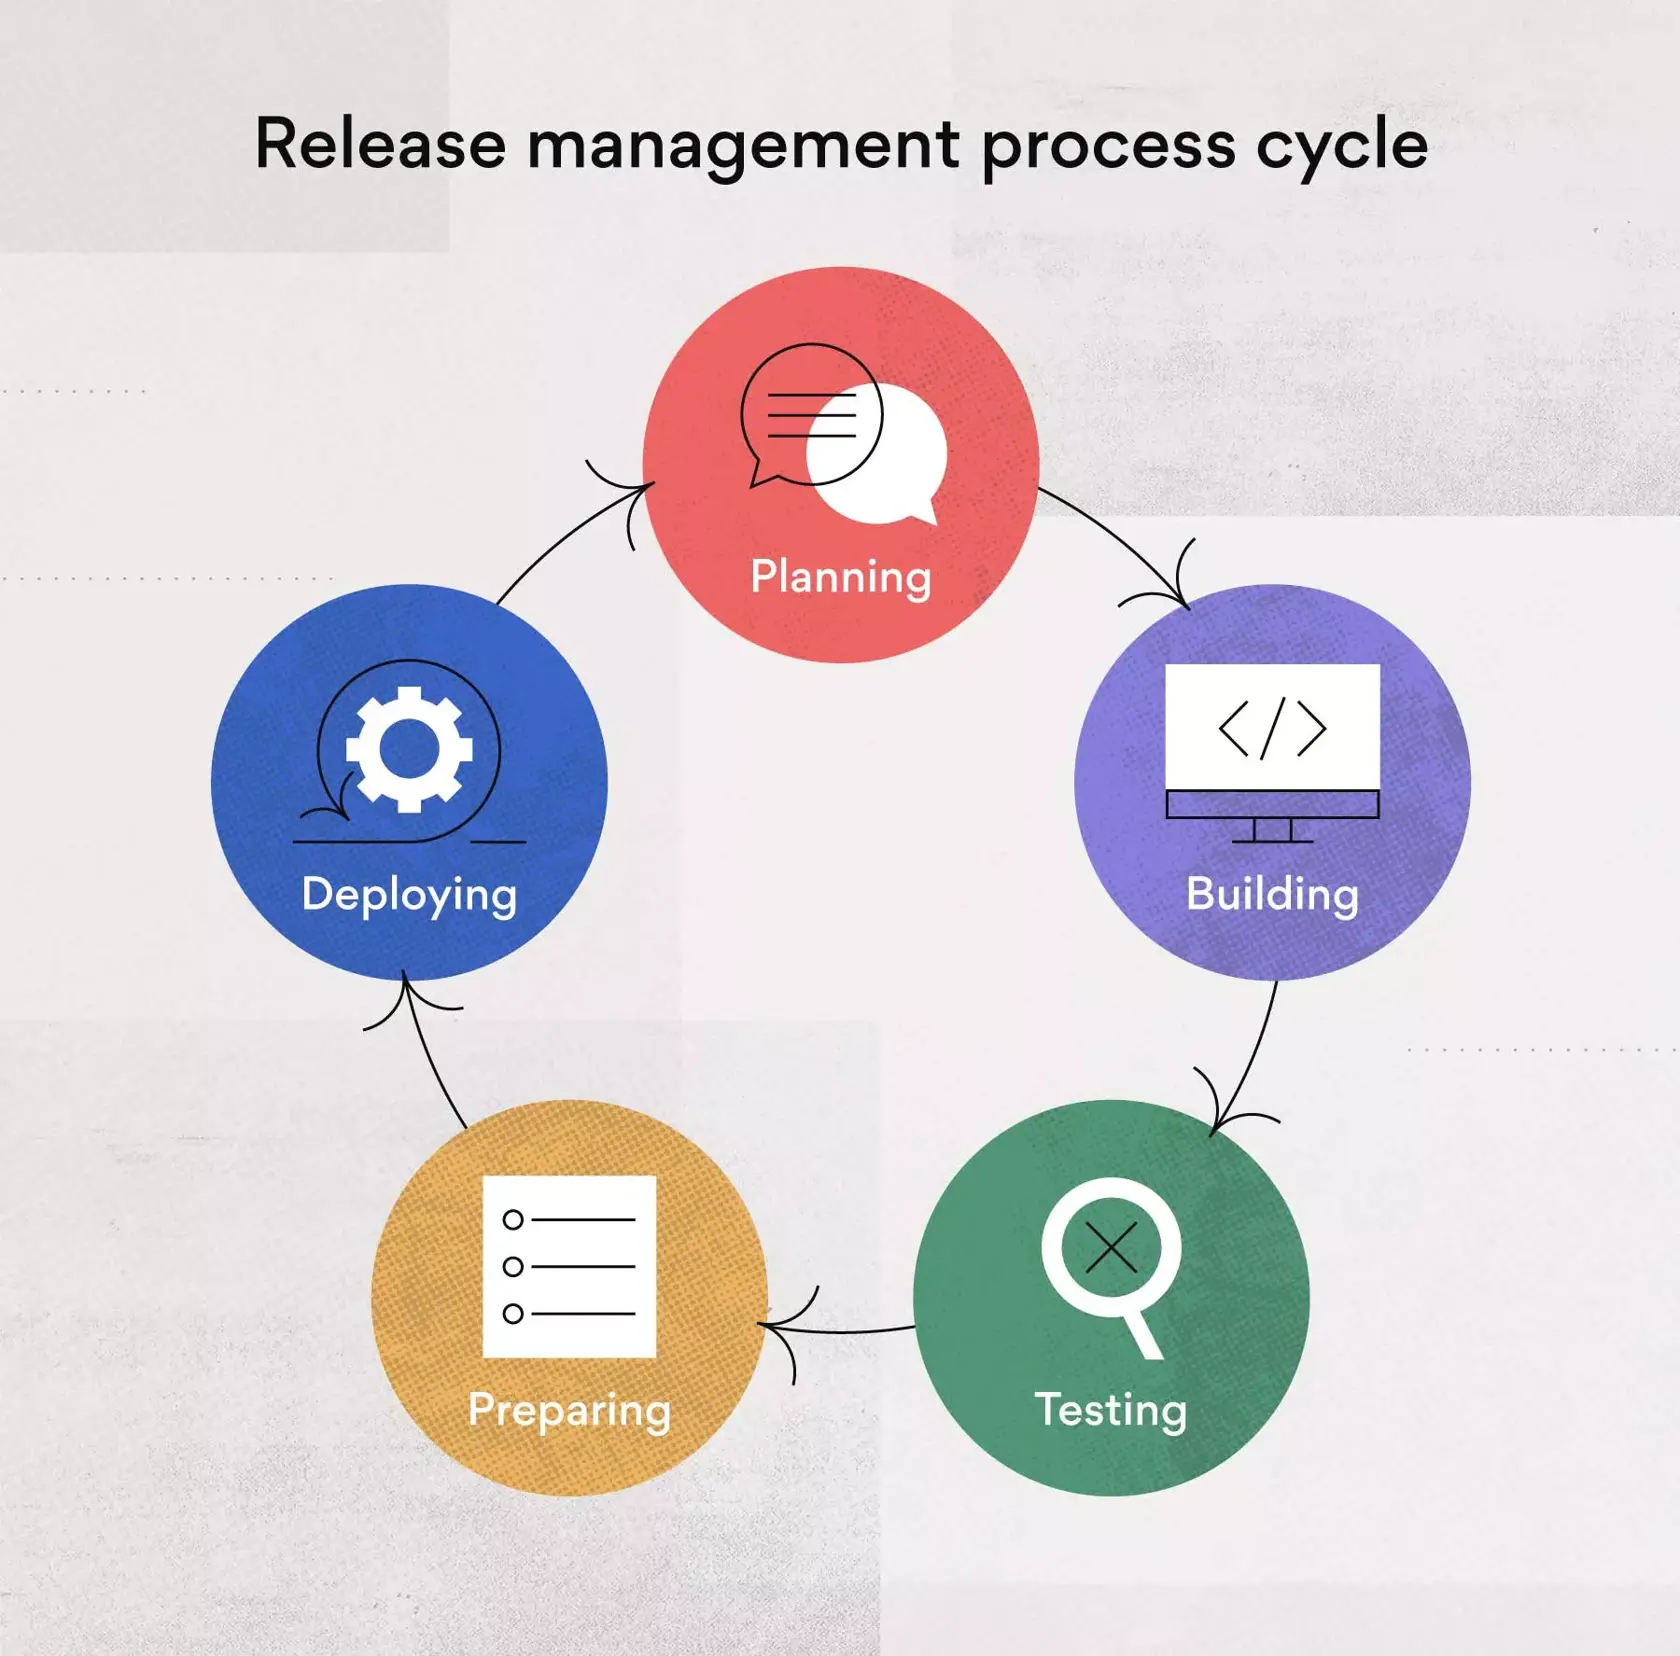 Release management process cycle